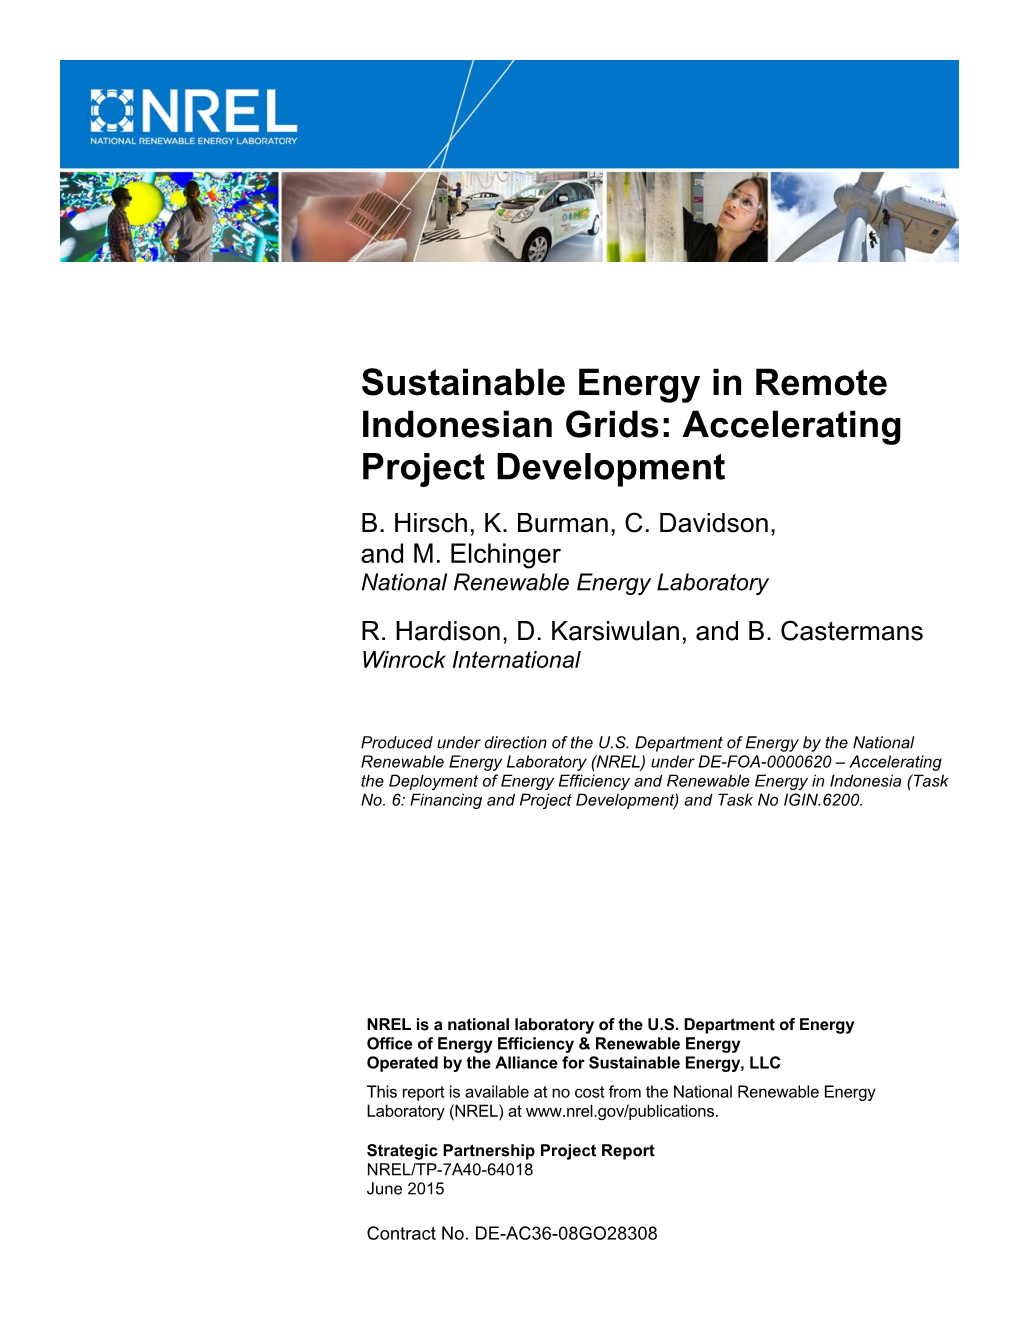 Sustainable Energy in Remote Indonesian Grids: Accelerating Project Development B